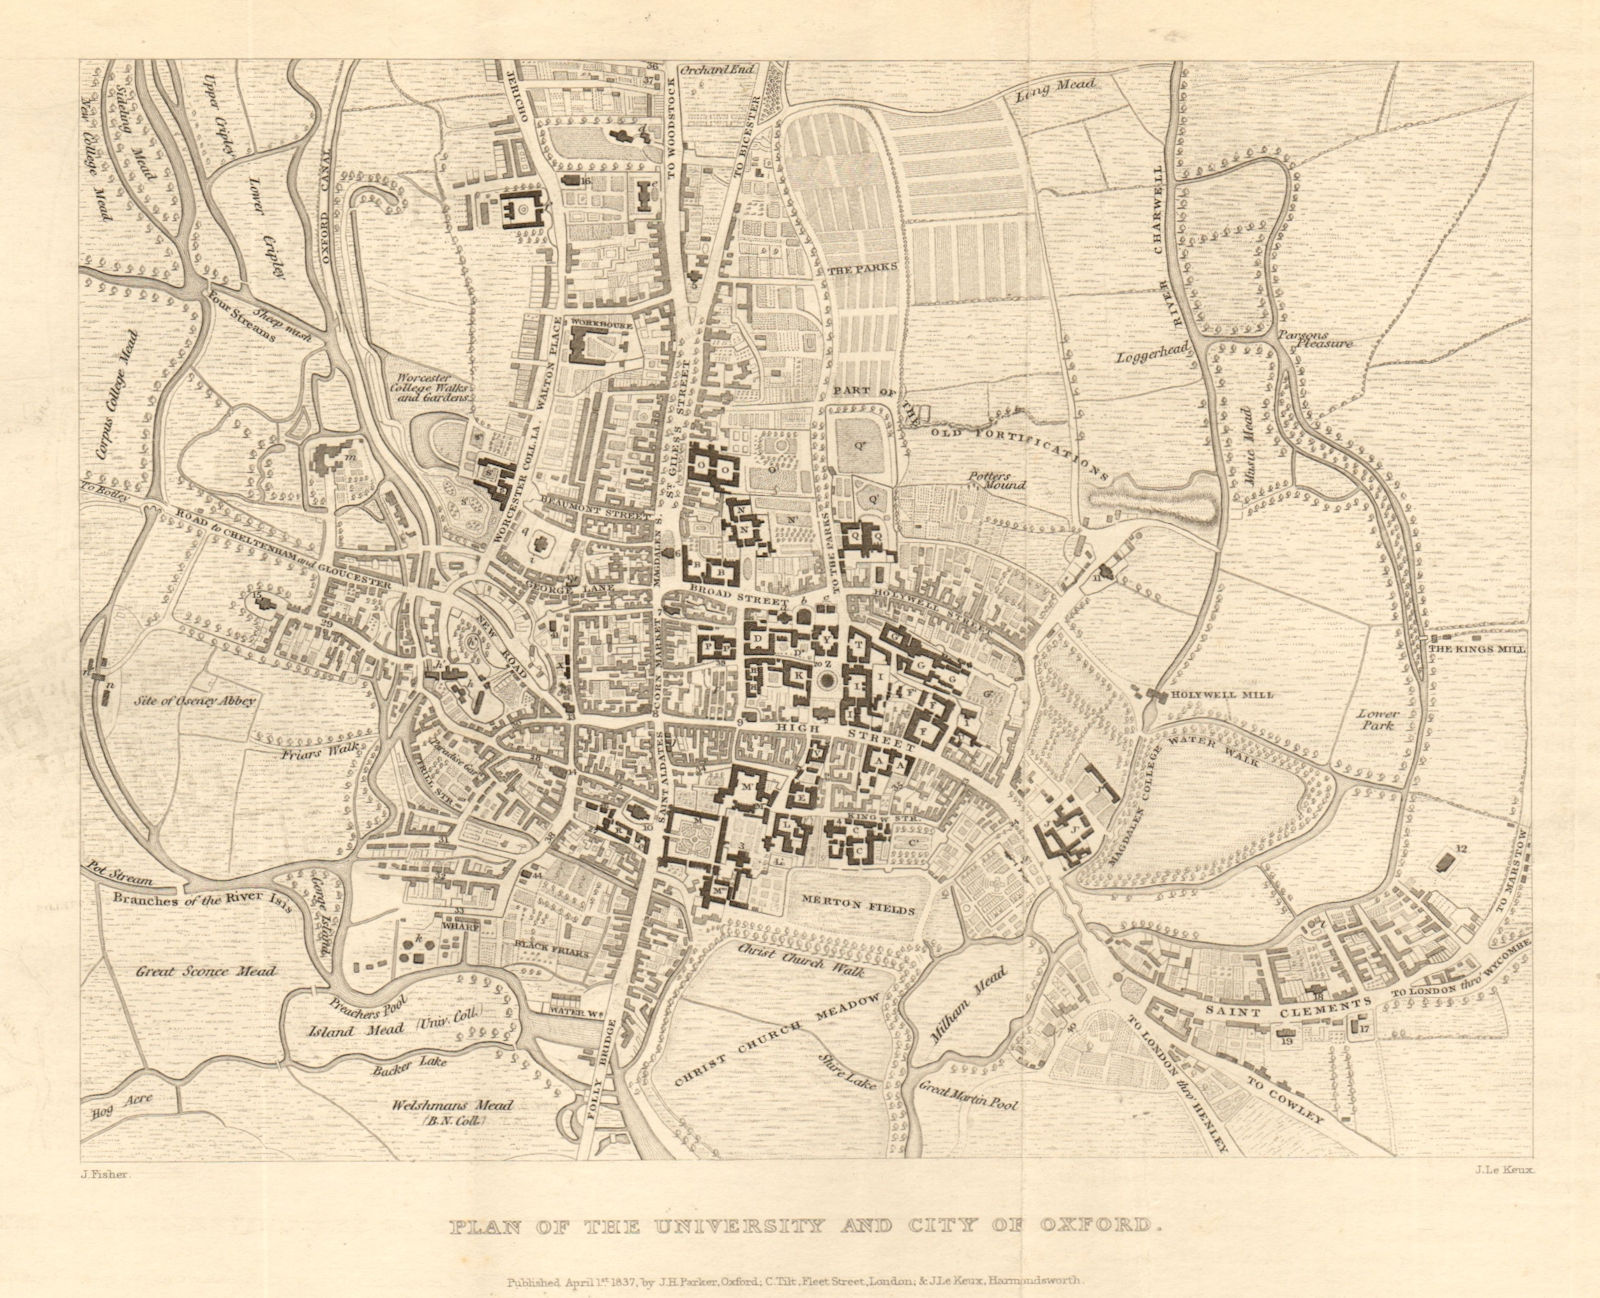 Associate Product "Plan of the University & City of Oxford". Town plan by John LE KEUX 1837 map